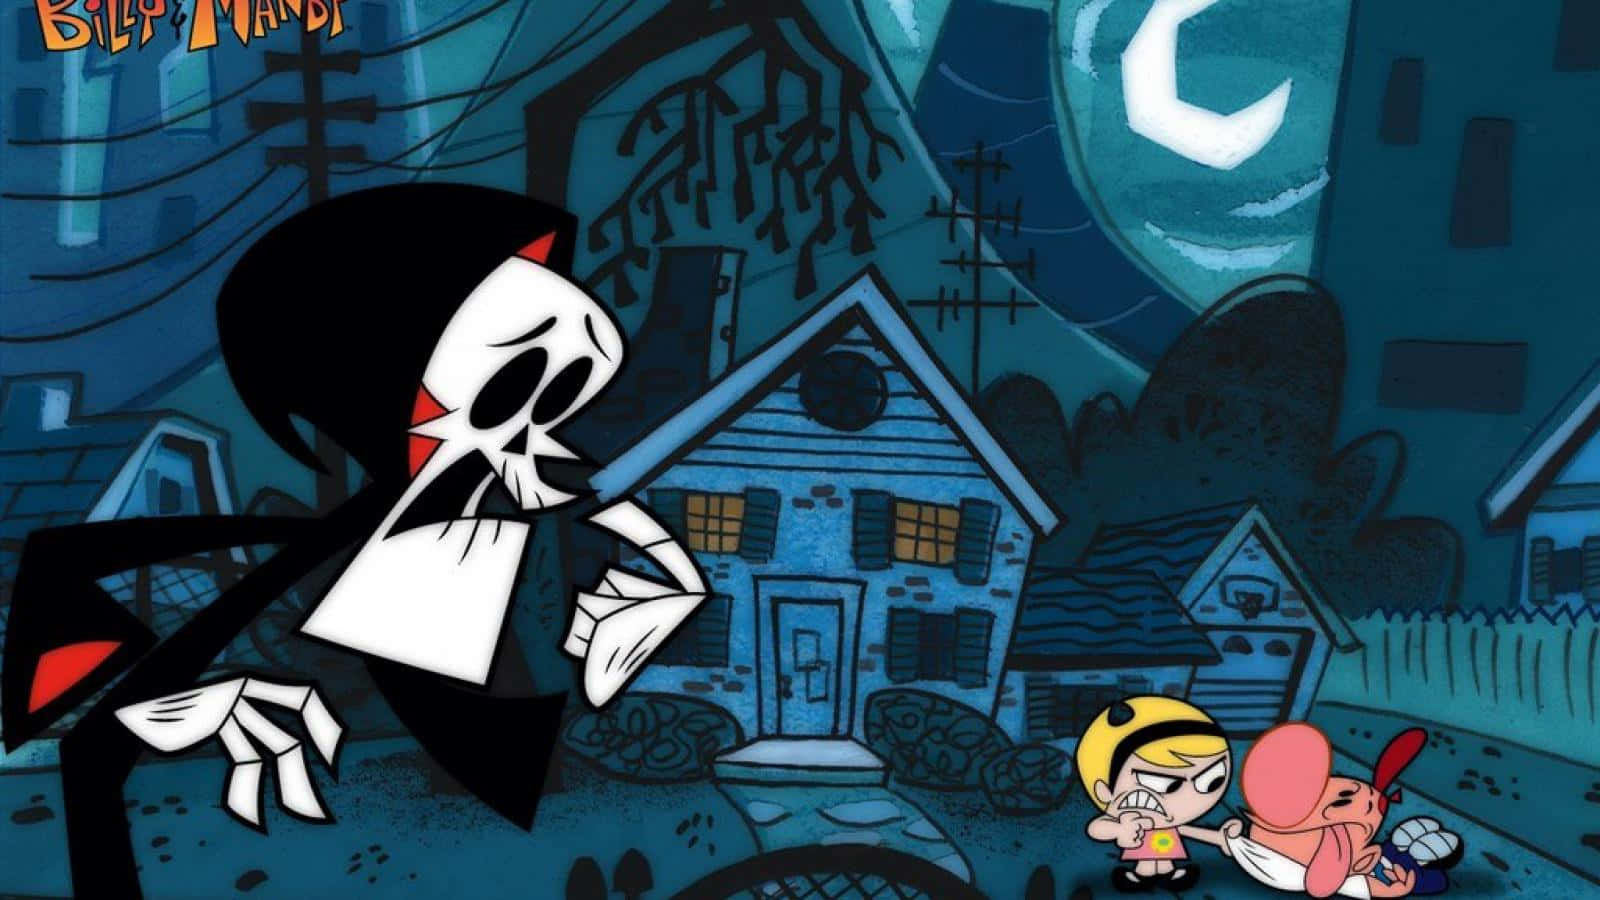 Billy, Mandy, and Grim in a thrilling adventure Wallpaper